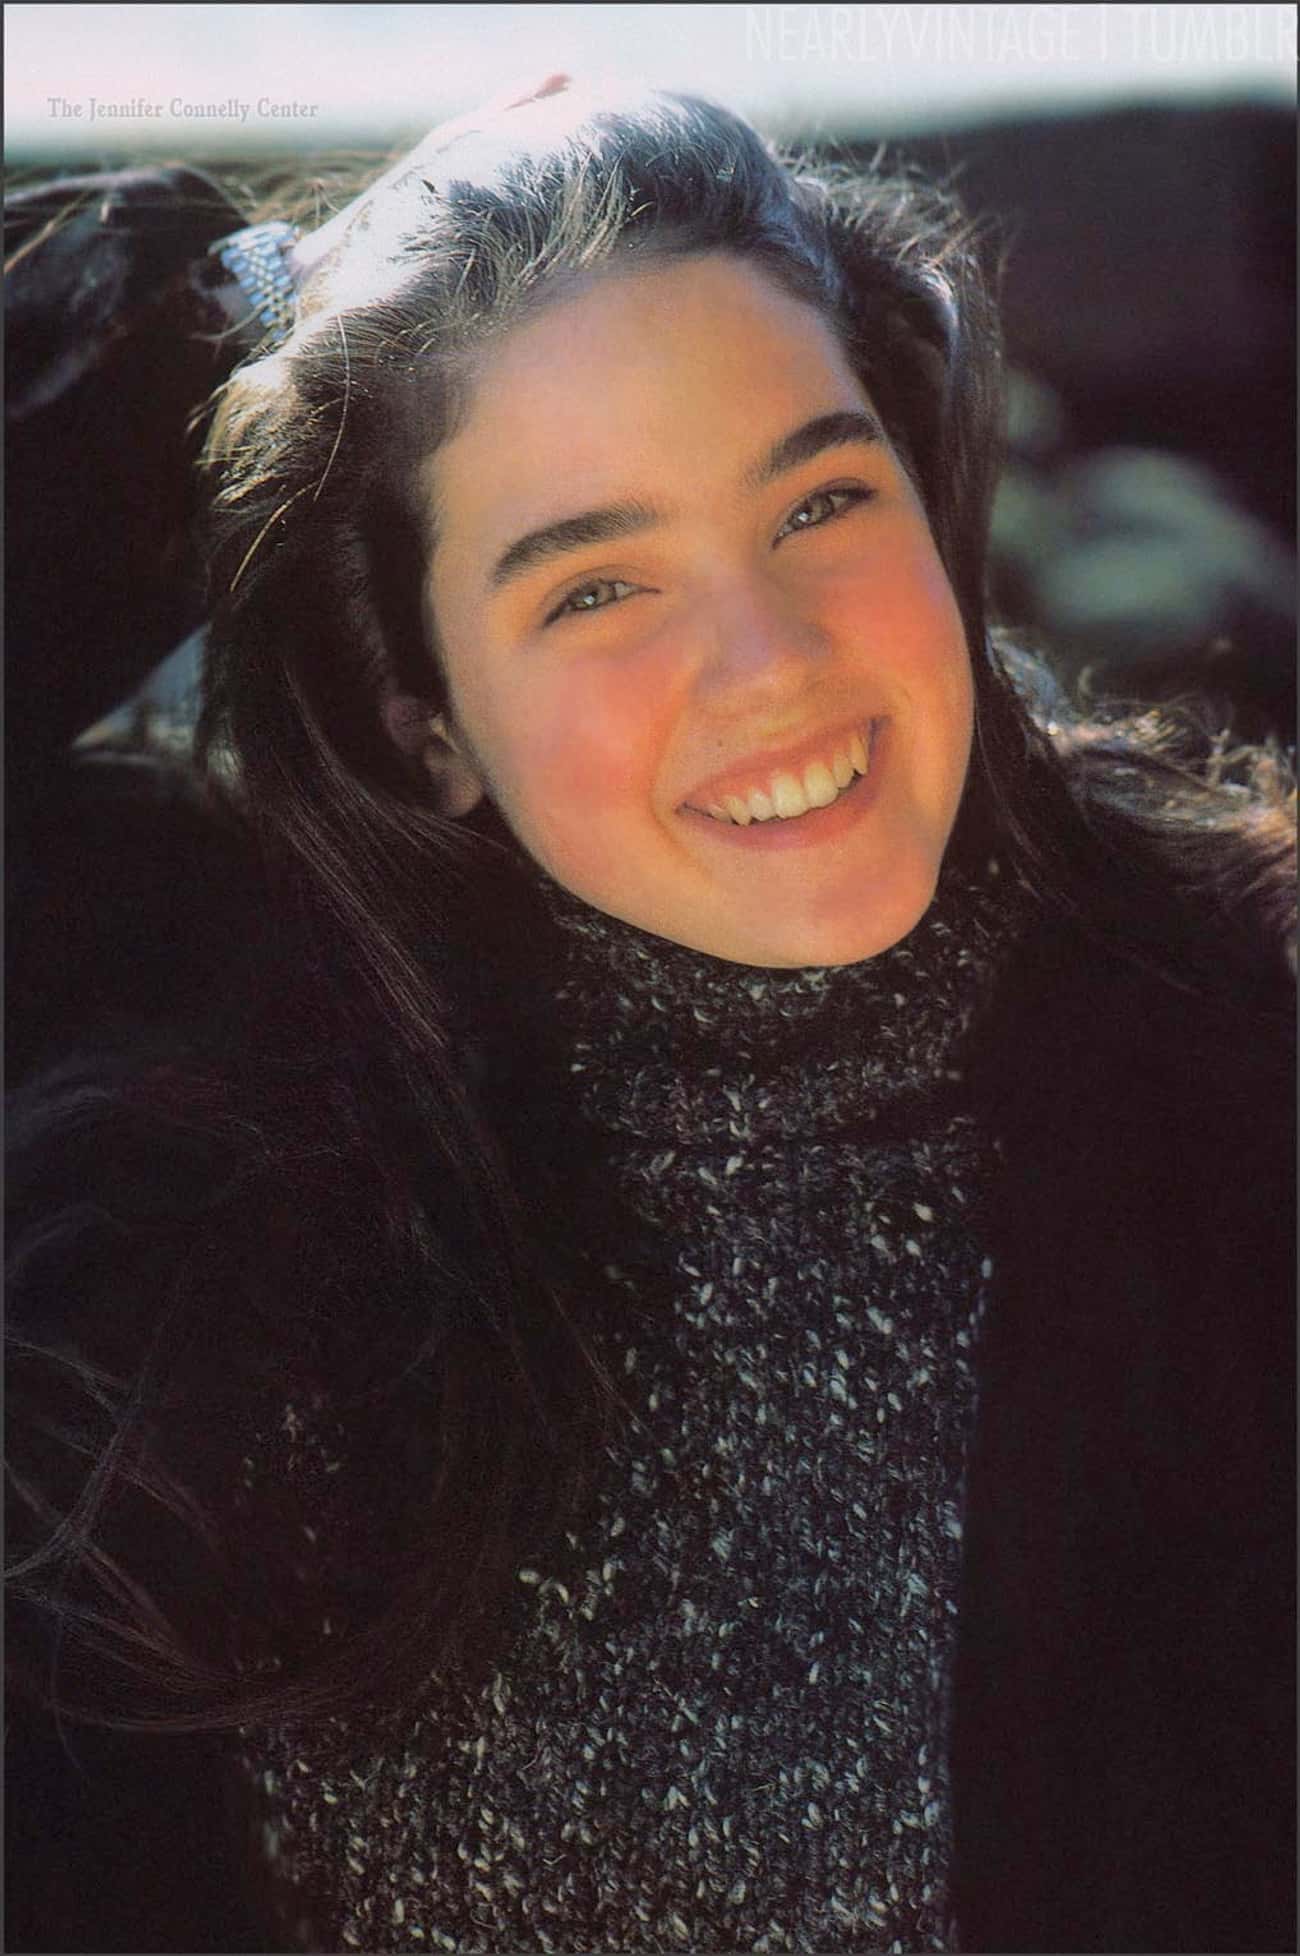 Young Jennifer Connelly Modeling